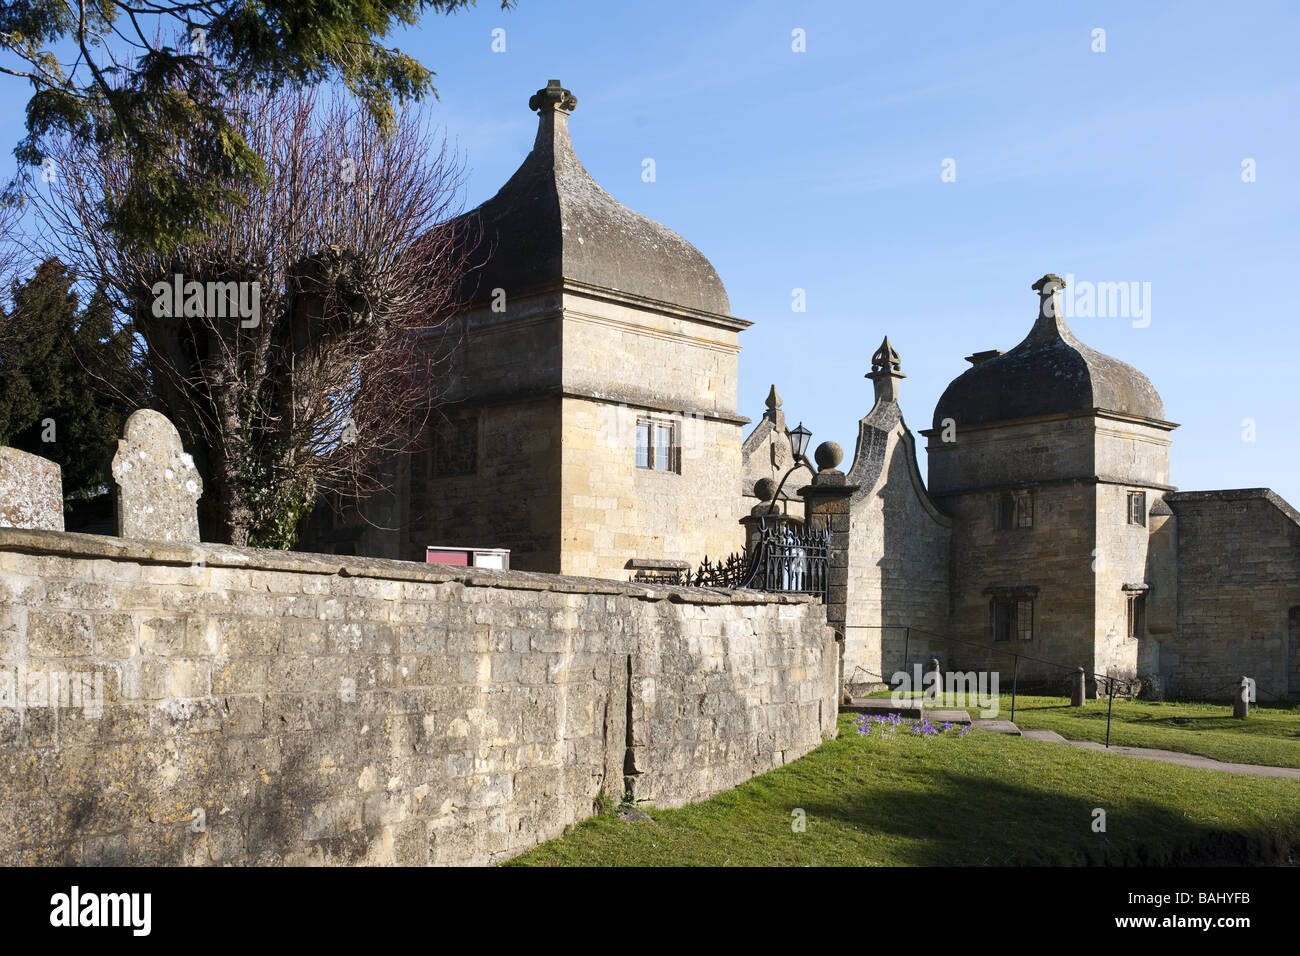 chipping campden village the cotswolds gloucestershire england st james wool church and entrance to manor house Stock Photo